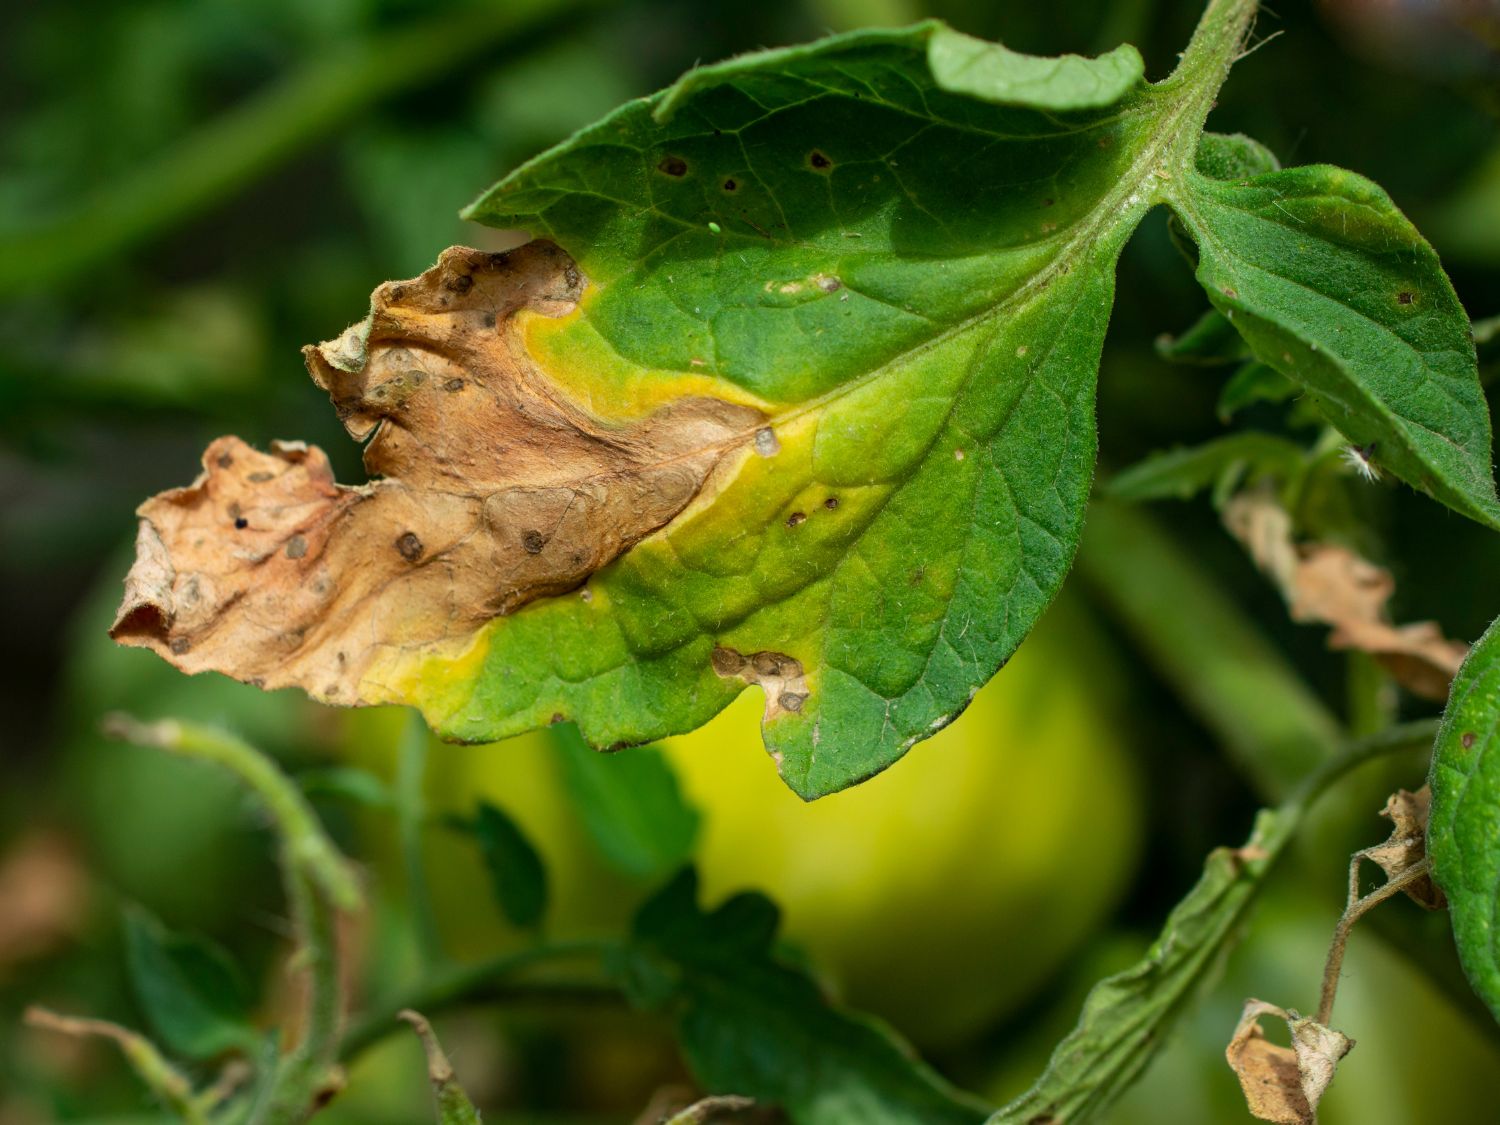 A close up photo of blight on a tomato leaf